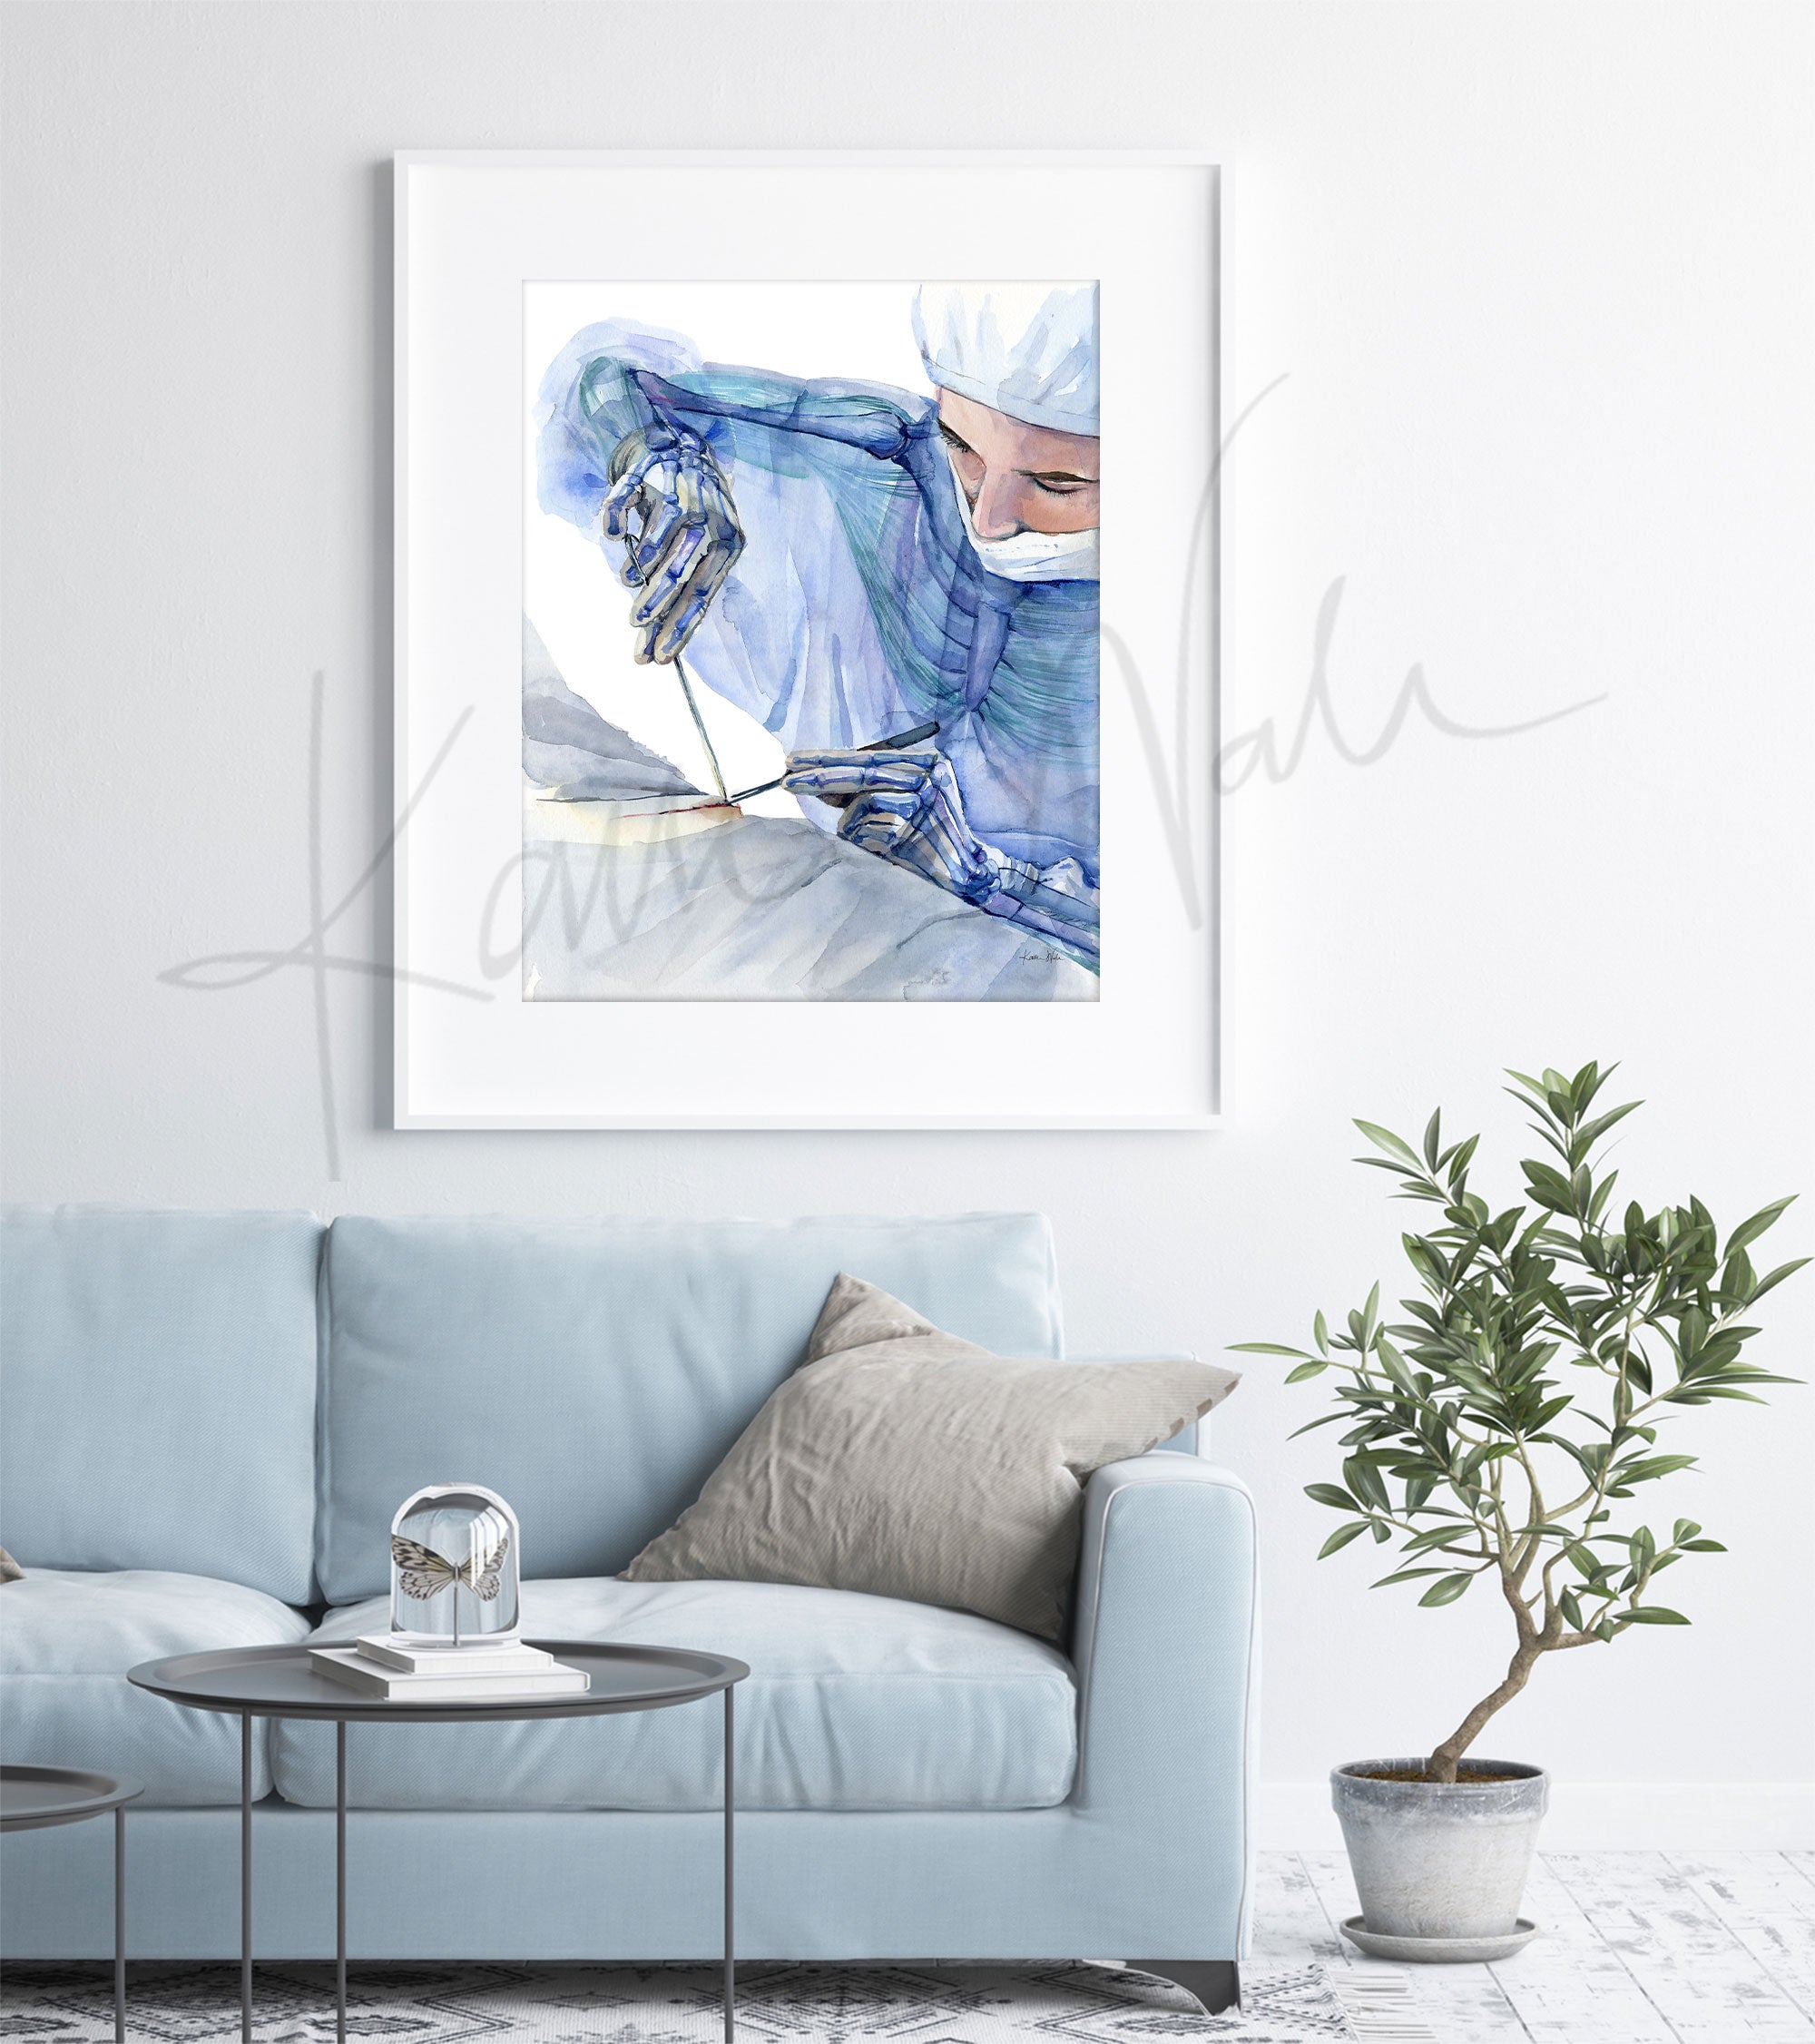 Framed watercolor painting showing the ergonomics of a surgeon at work. The painting is hanging over a blue couch.